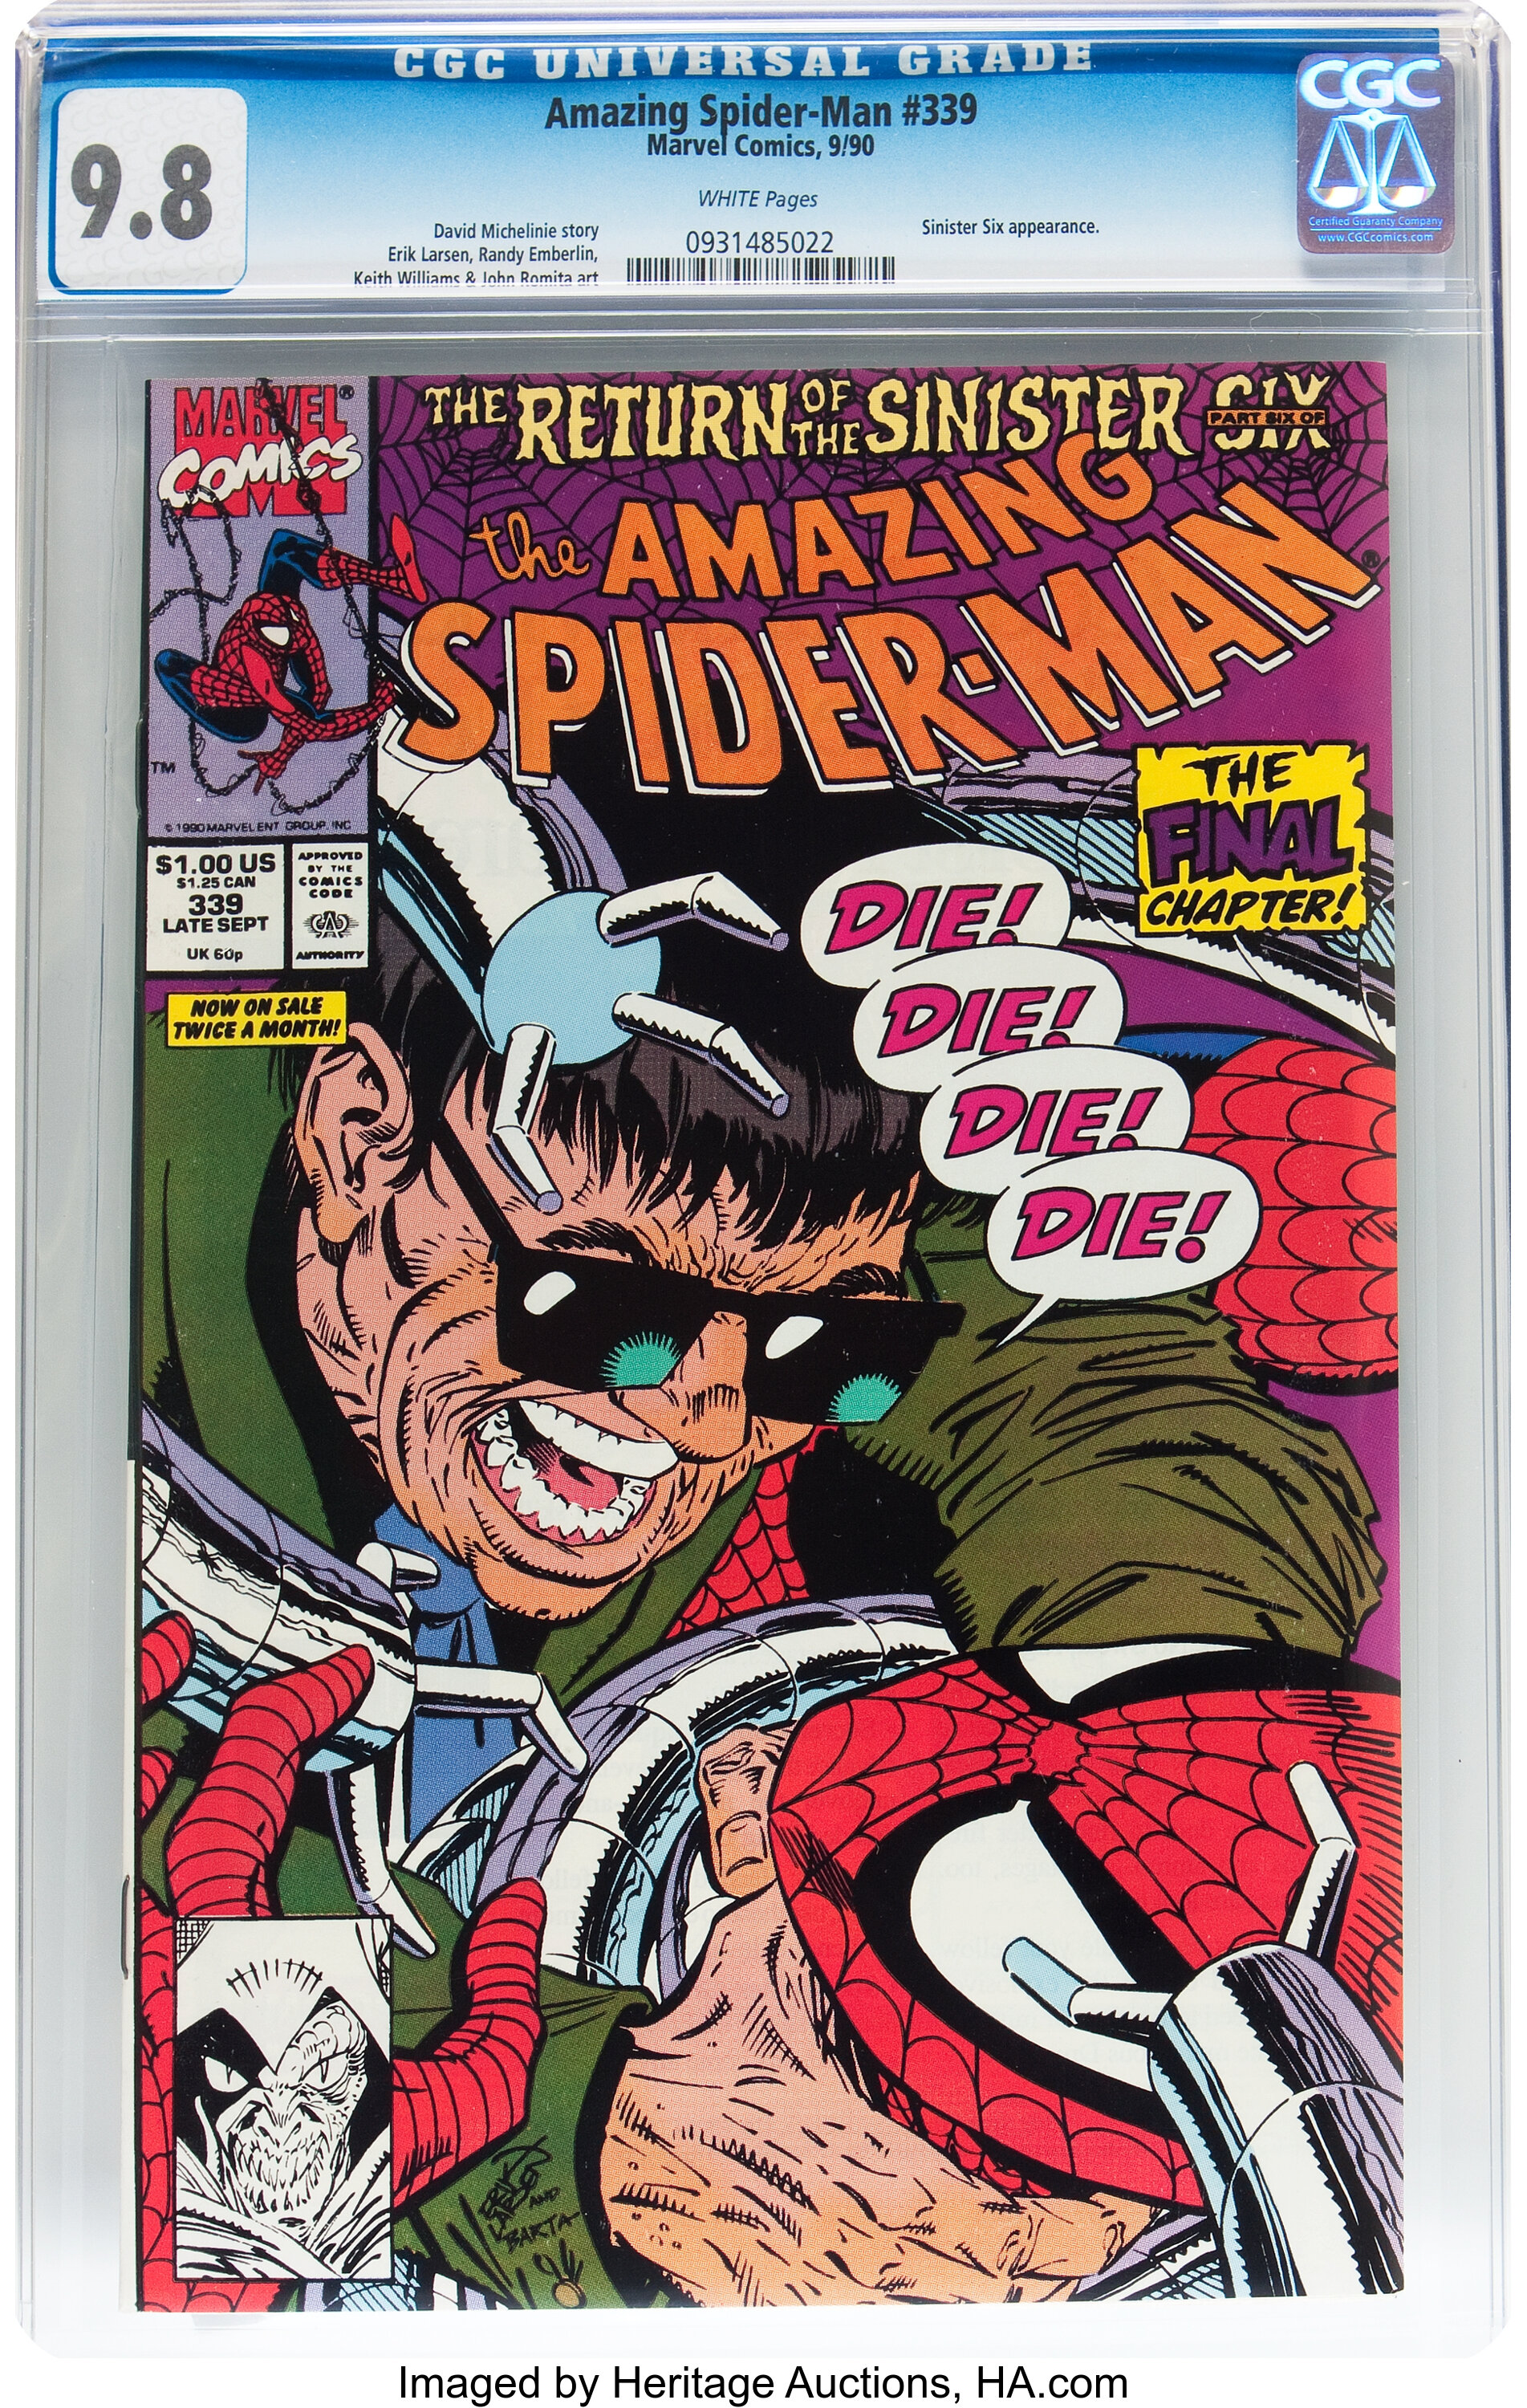 Search: The Amazing Spider-Man #339